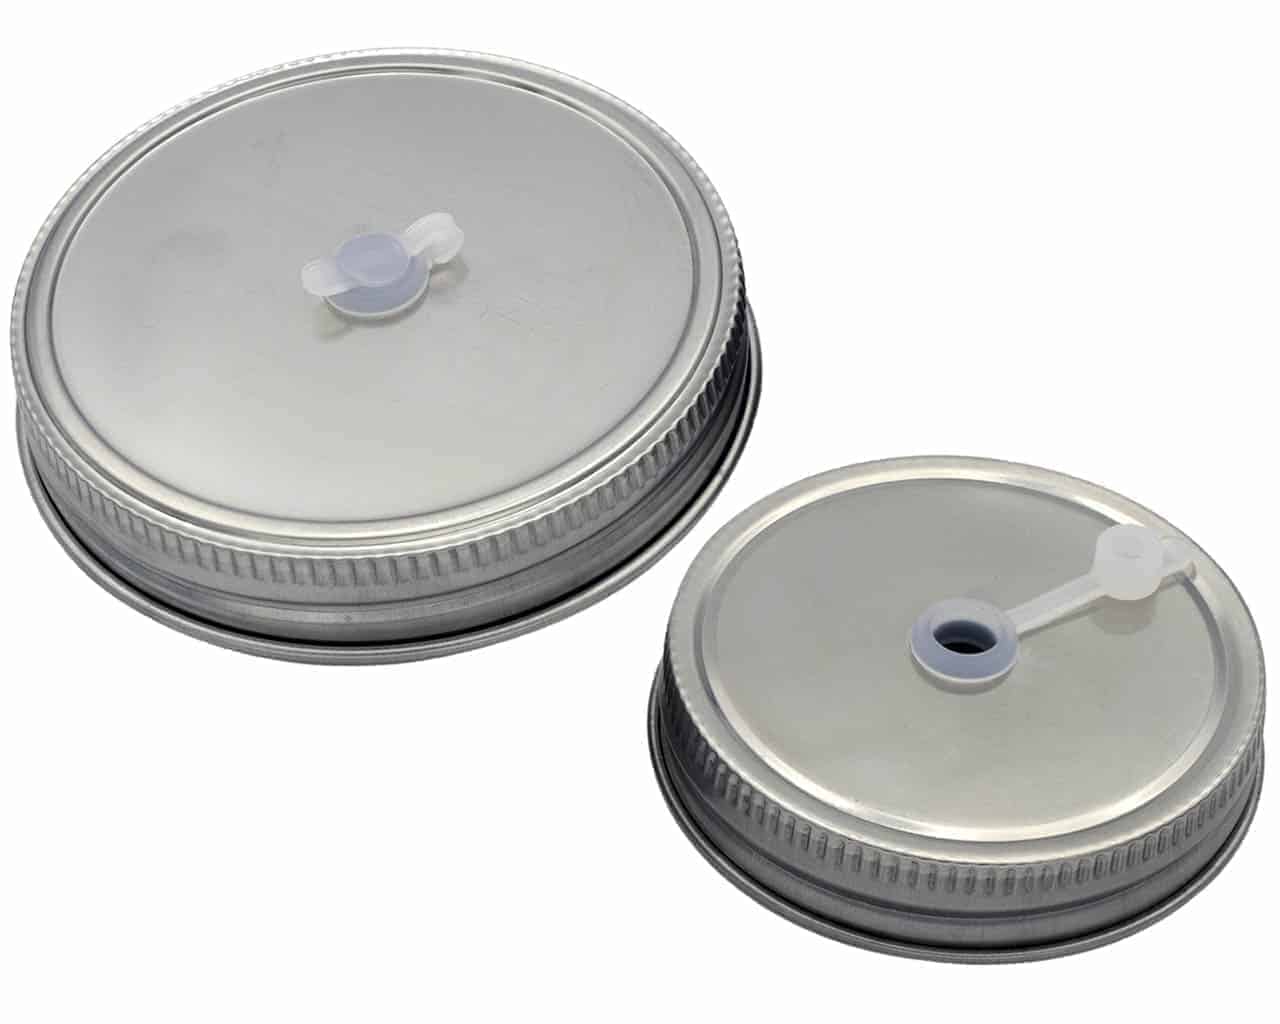 silicone-straw-hole-grommets-with-plug-10mm-reduce-to-8mm-mason-jar-lids-regular-wide-mouth-straw-hole-lids